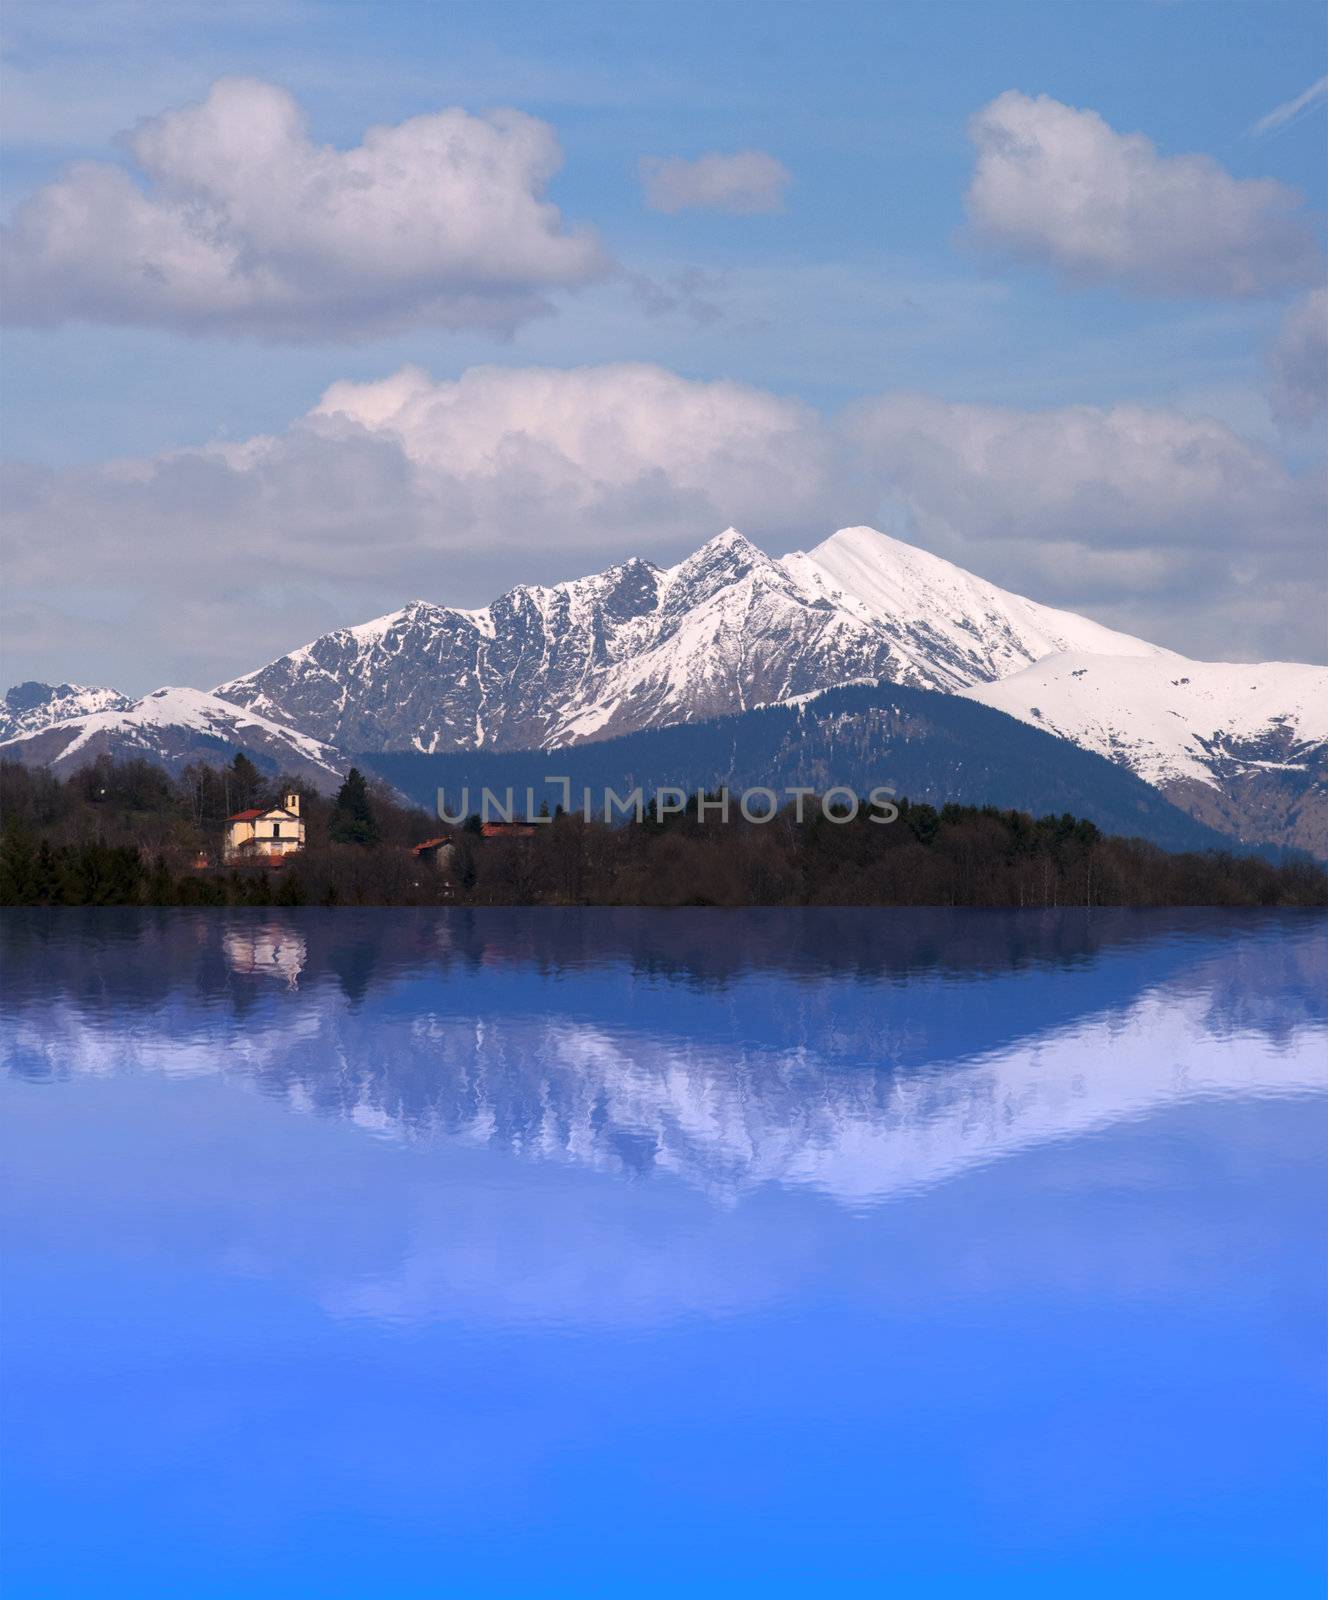 A snow-covered mountain with a church reflected in a lake